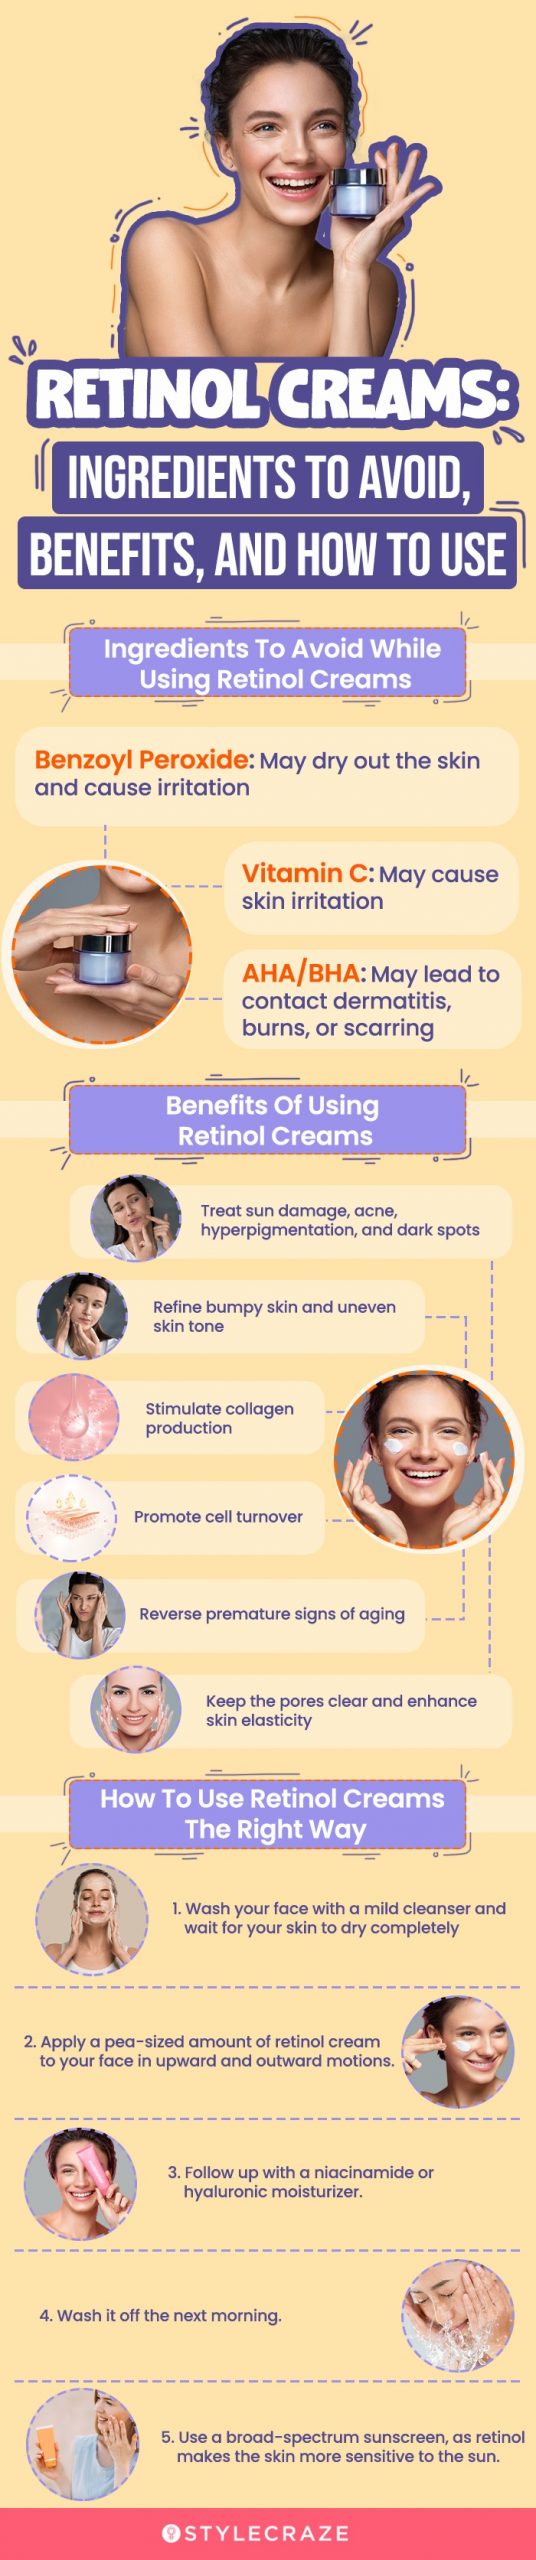 Retinol Creams: Ingredients To Avoid, Benefits, And How To Use [infographic]